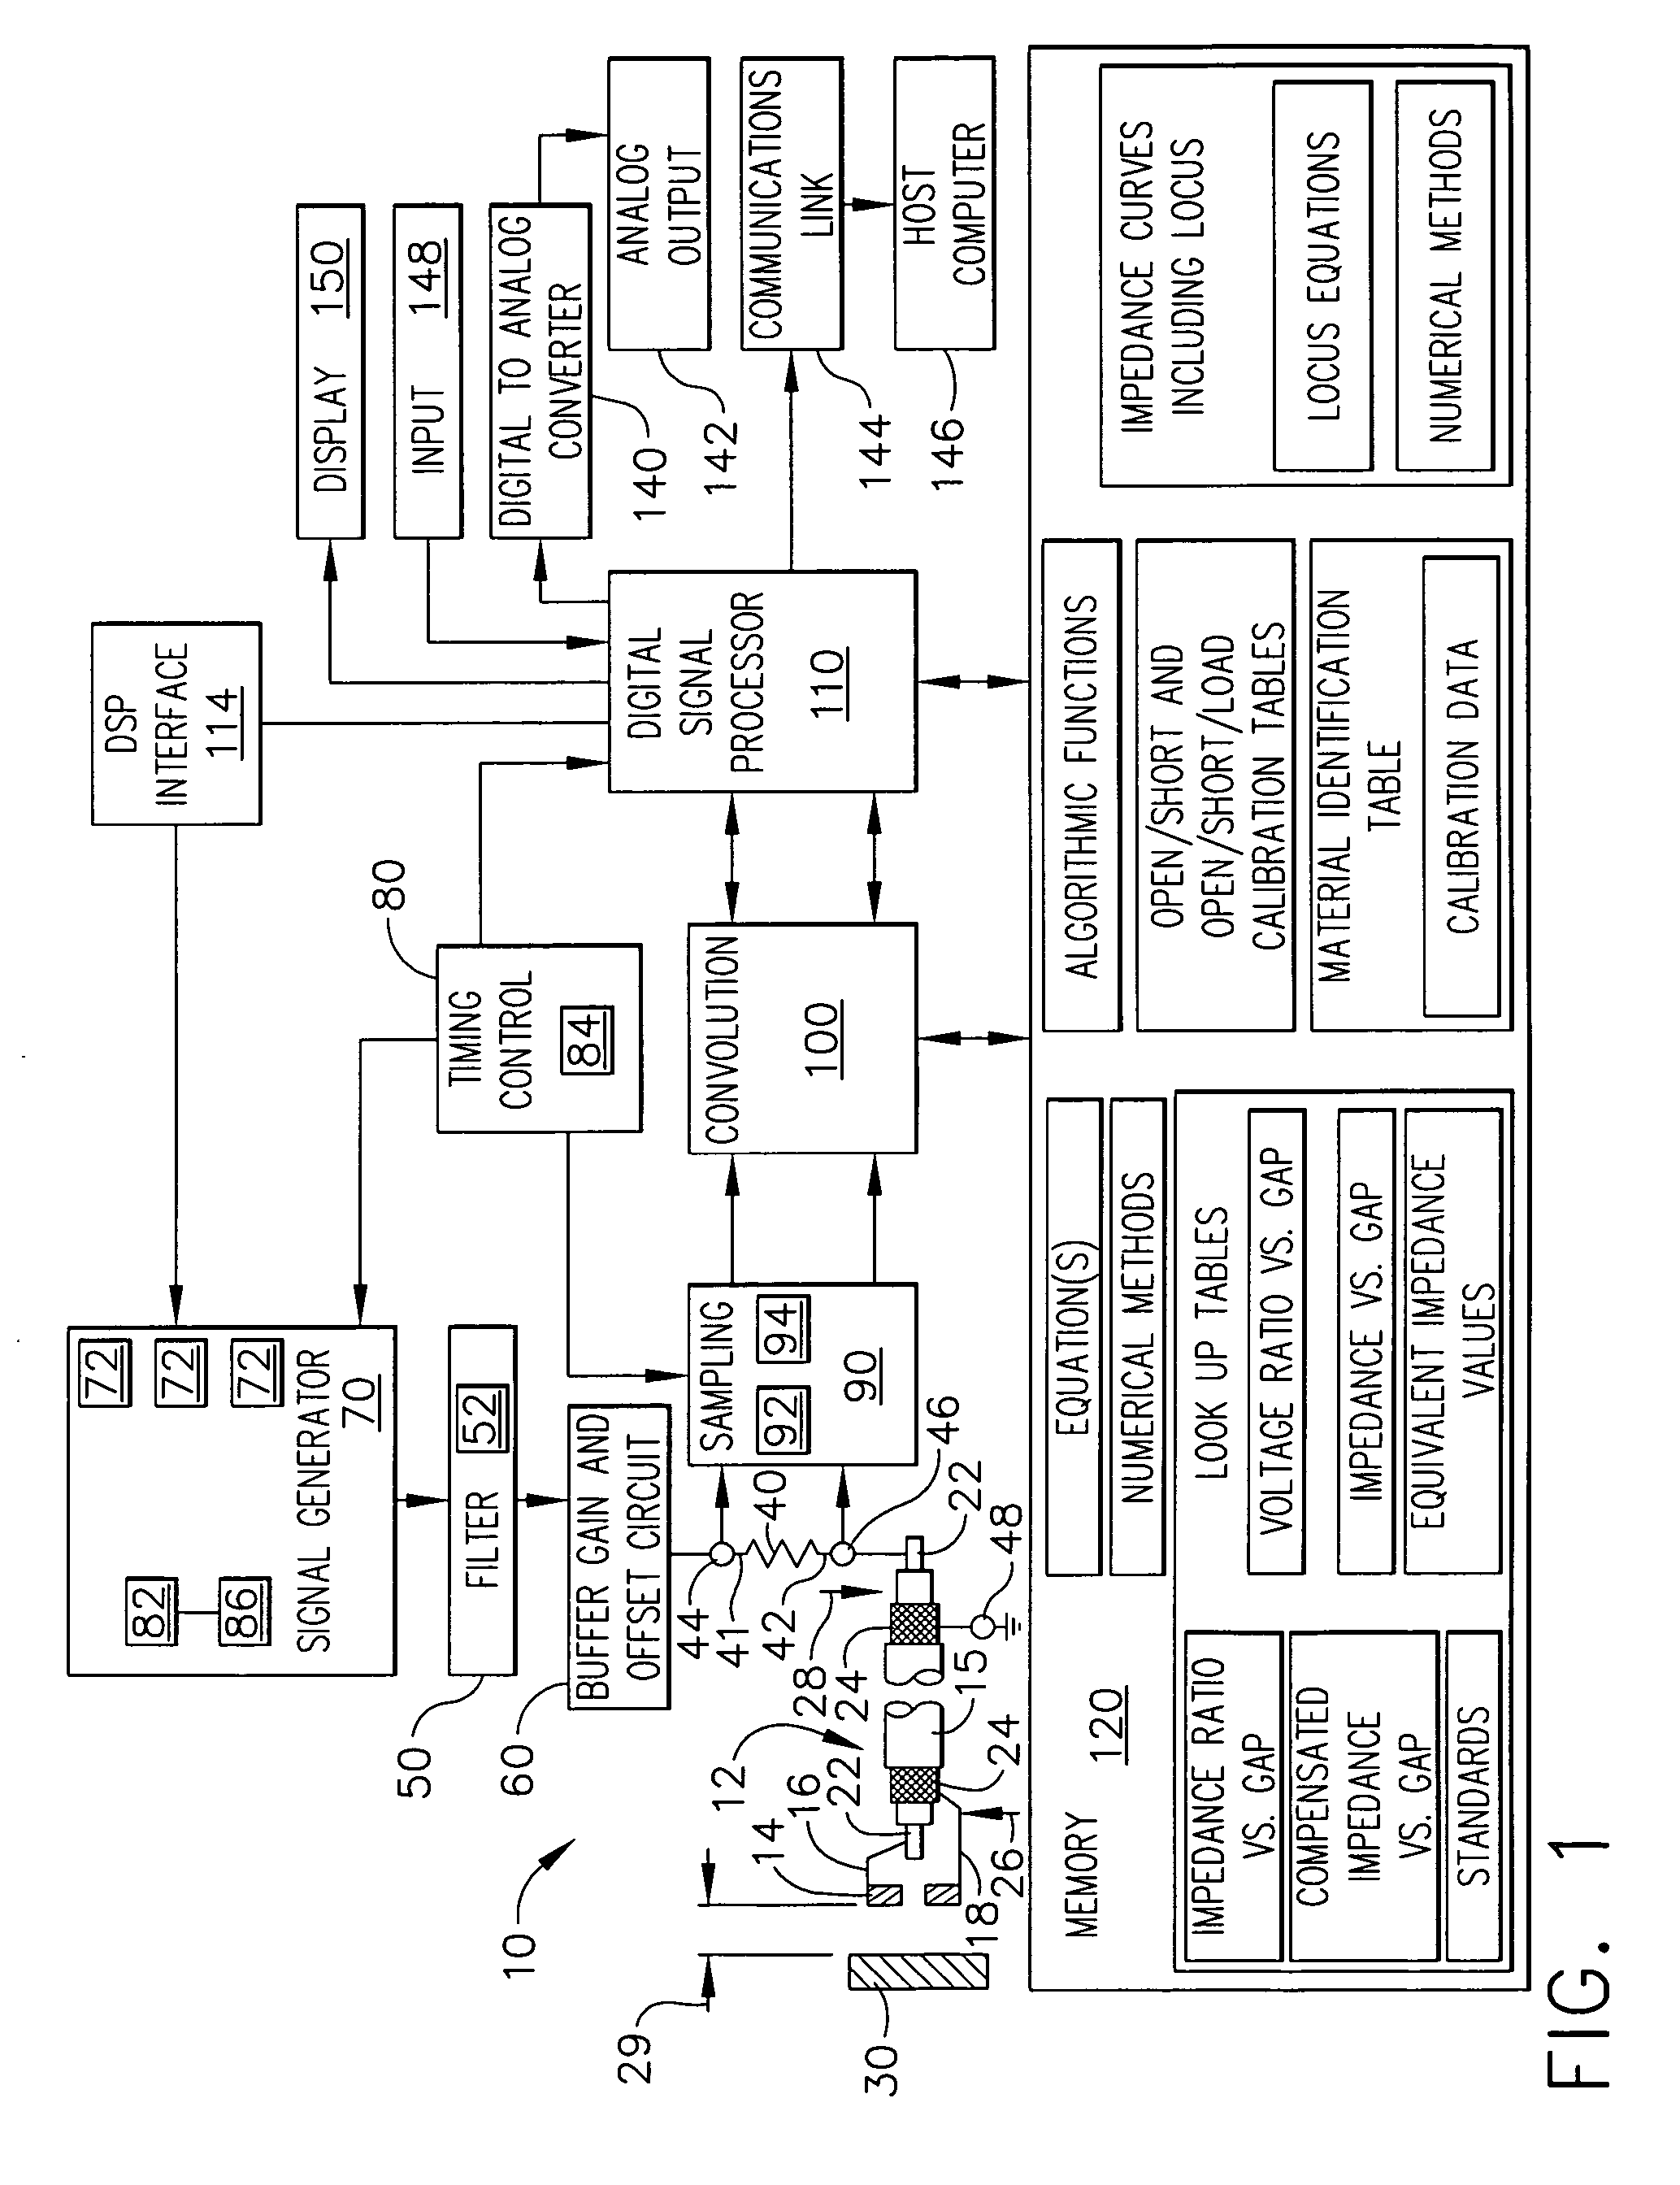 Method and system for multi-frequency inductive ratio measurement